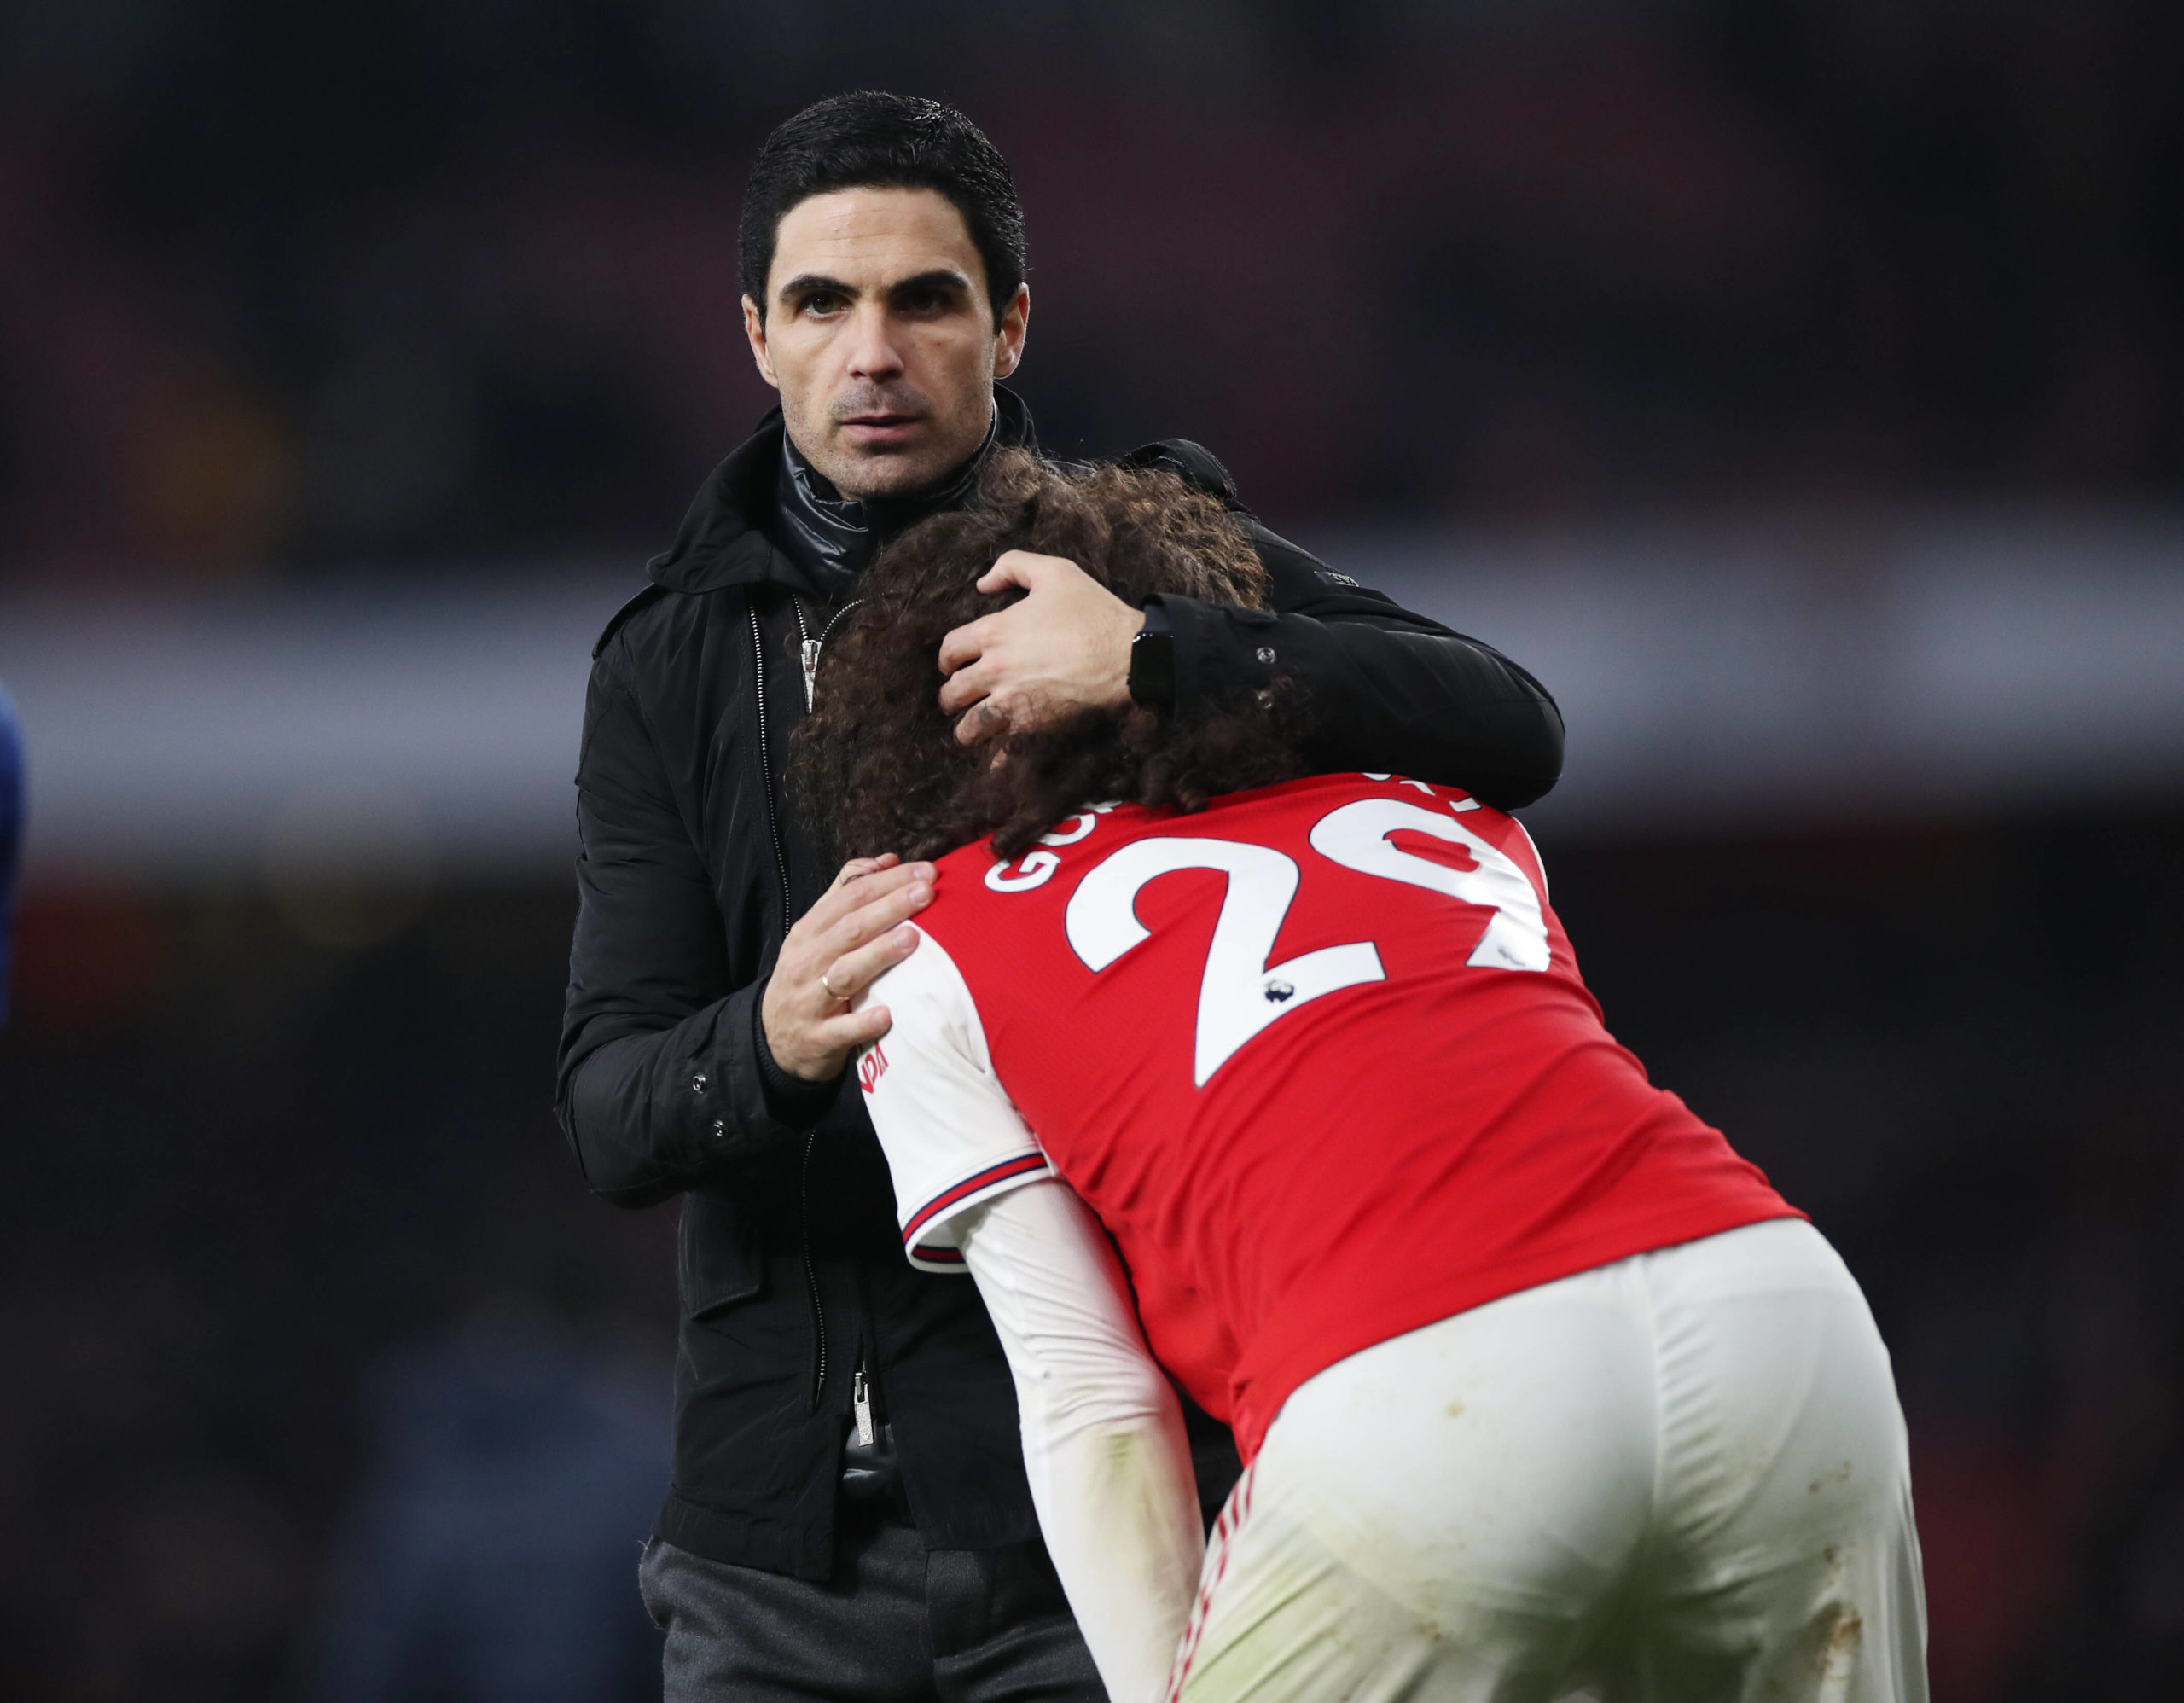 What happened between Mikel Arteta and Matteo Guendouzi? Sport Bilder des Tages Mikel Arteta manager of Arsenal comfort Matteo Guendouzi of Arsenal following the loss during the Premier League match at the Emirates Stadium, London. Picture date: 29th December 2019. Credit: David Klein/Sportimage 